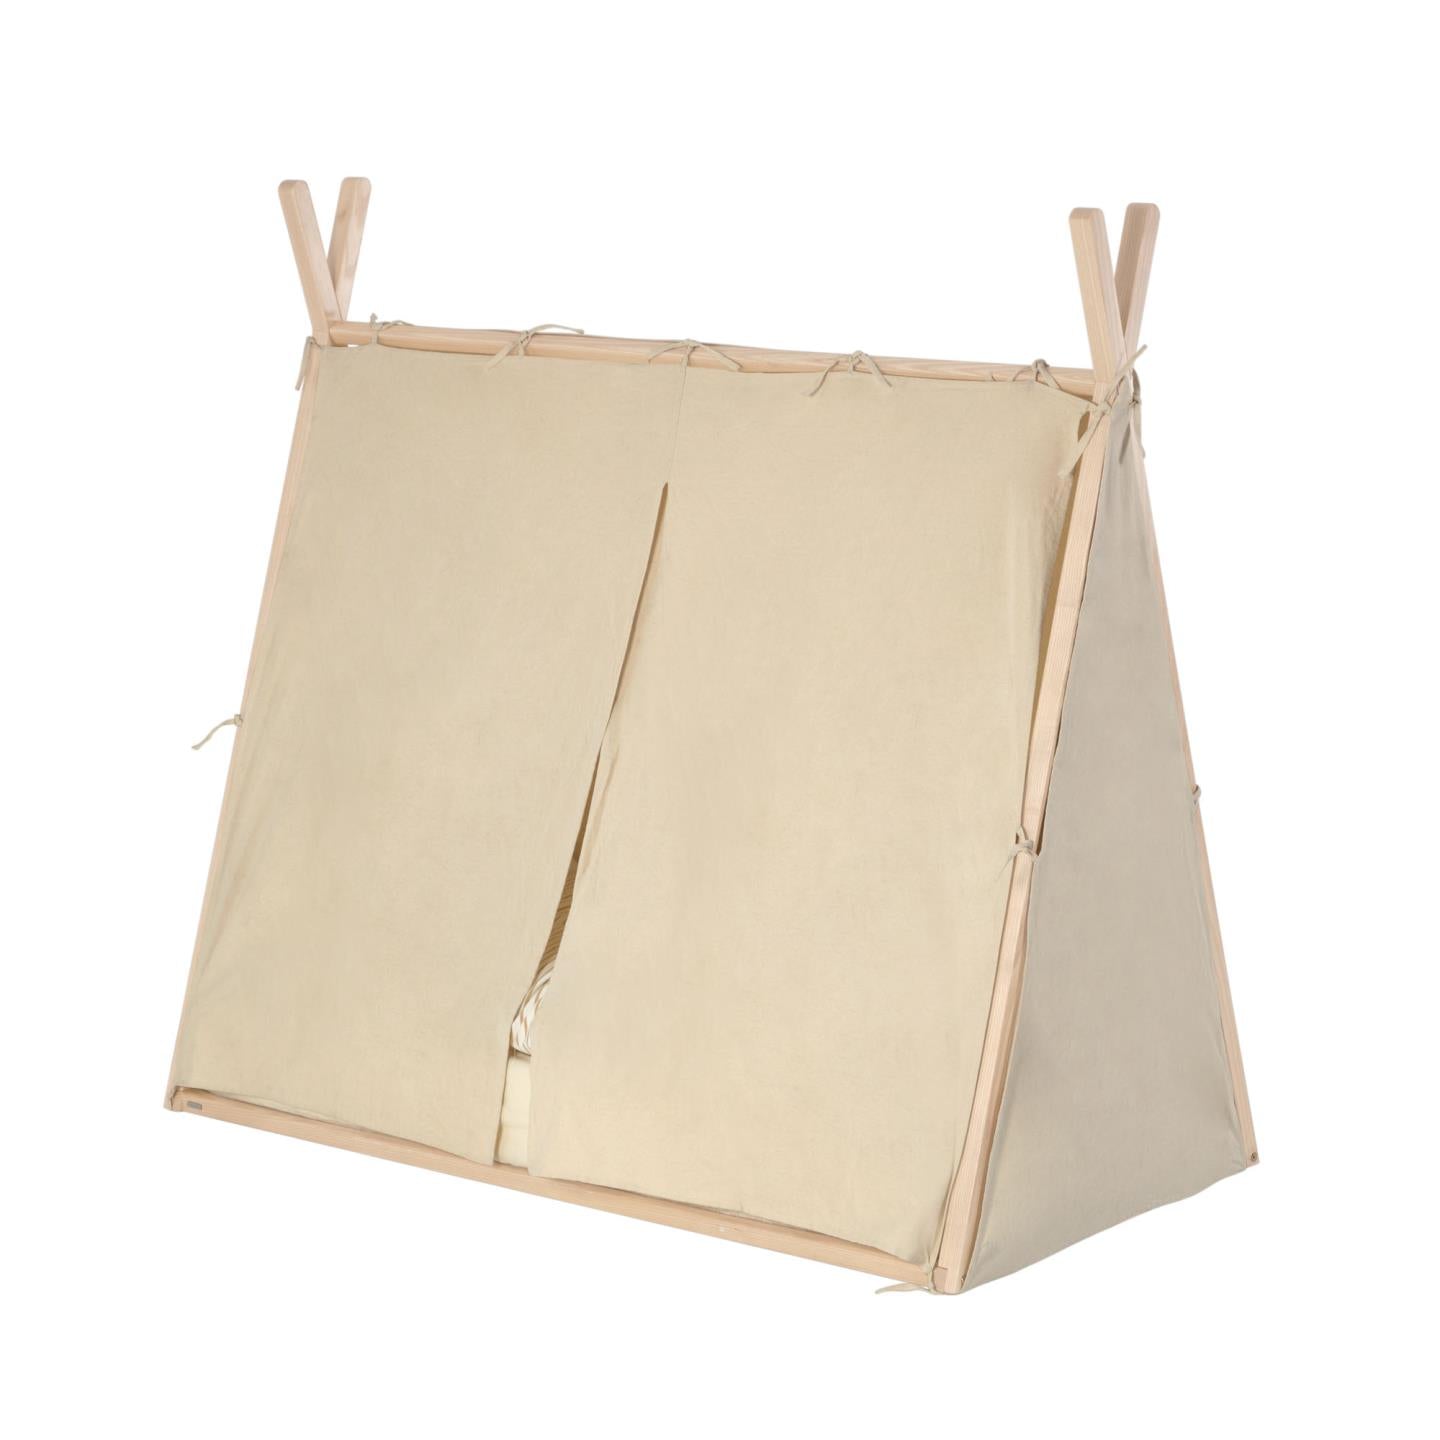 100% cotton canopy for Maralis tipi bed 70 x 140 cm